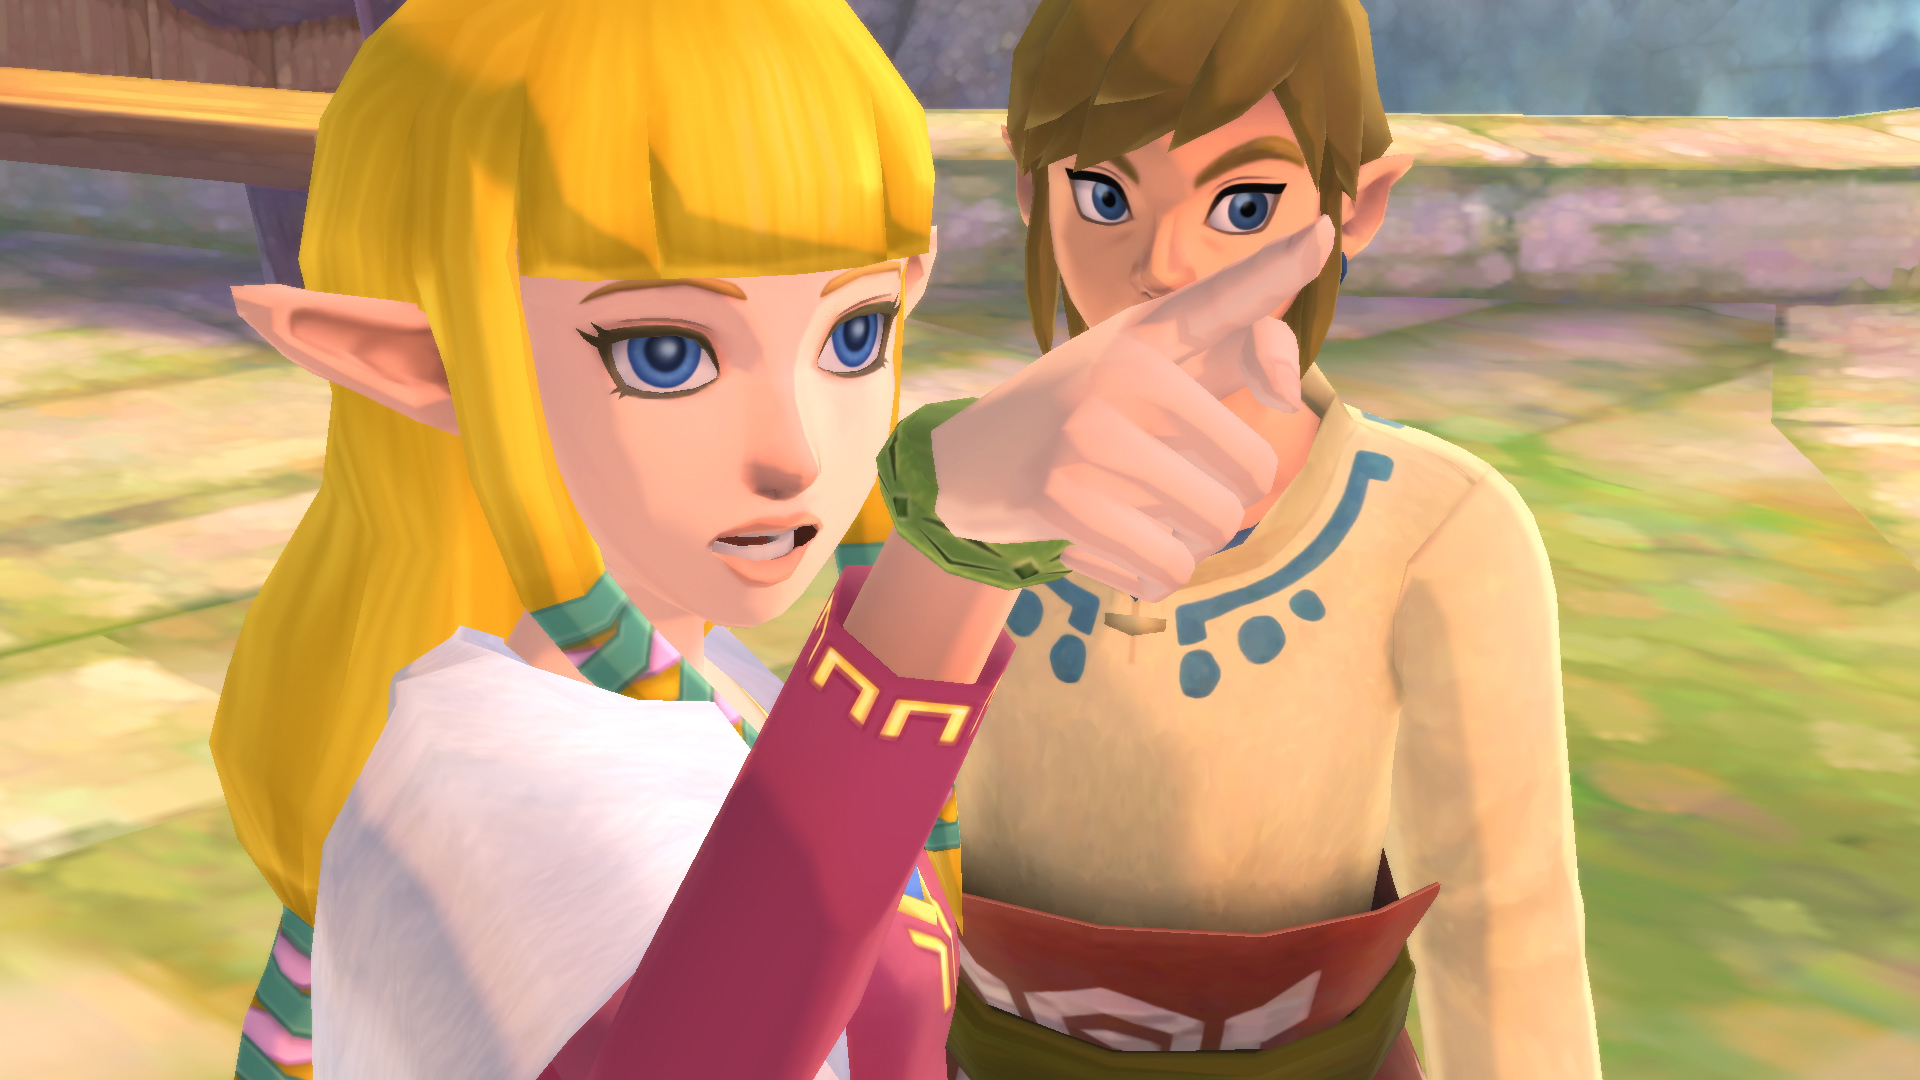 Caption Contest 304: "Have YOU played Skyward Sword HD yet? 